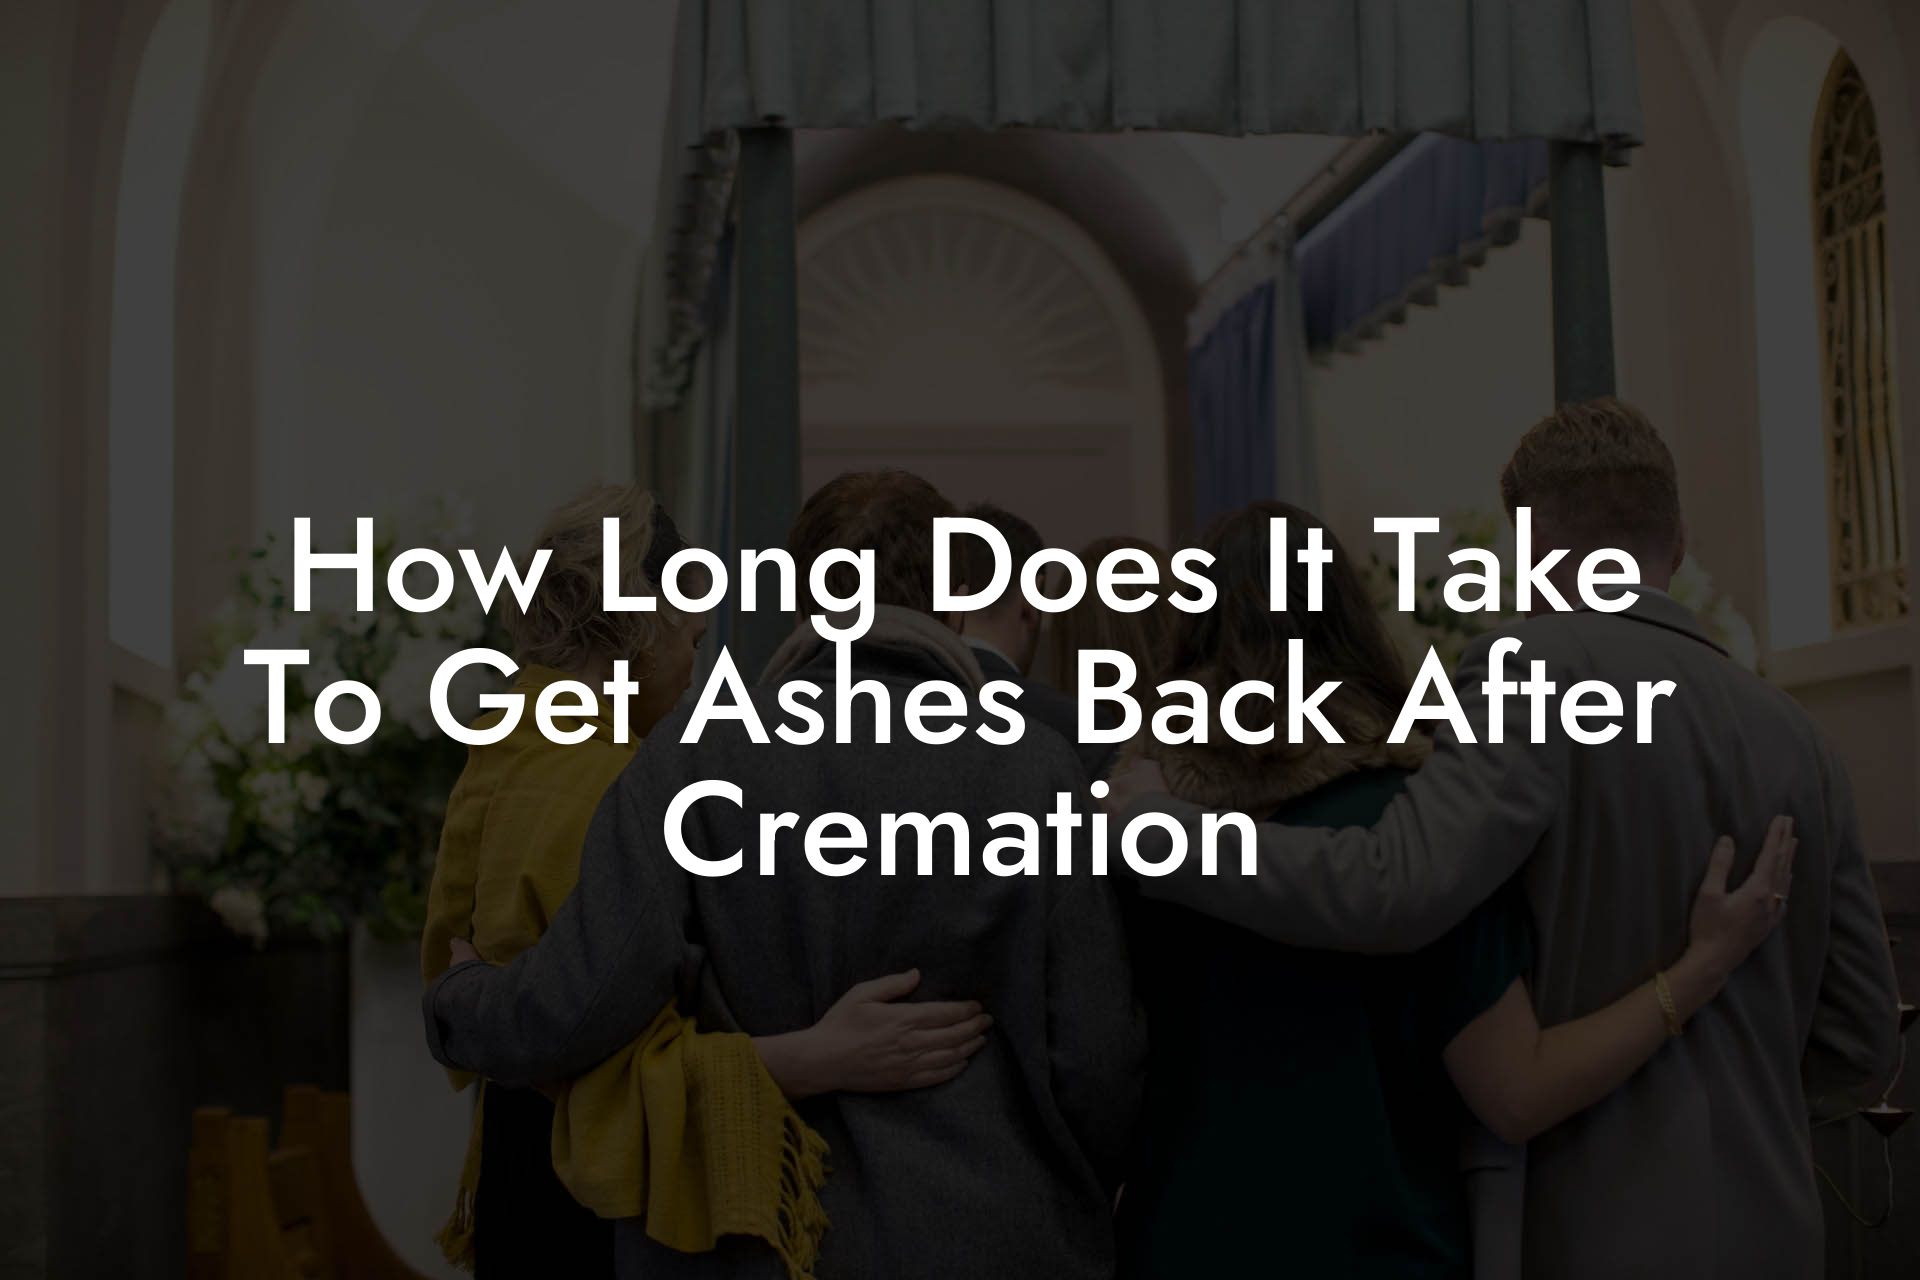 How Long Does It Take To Get Ashes Back After Cremation